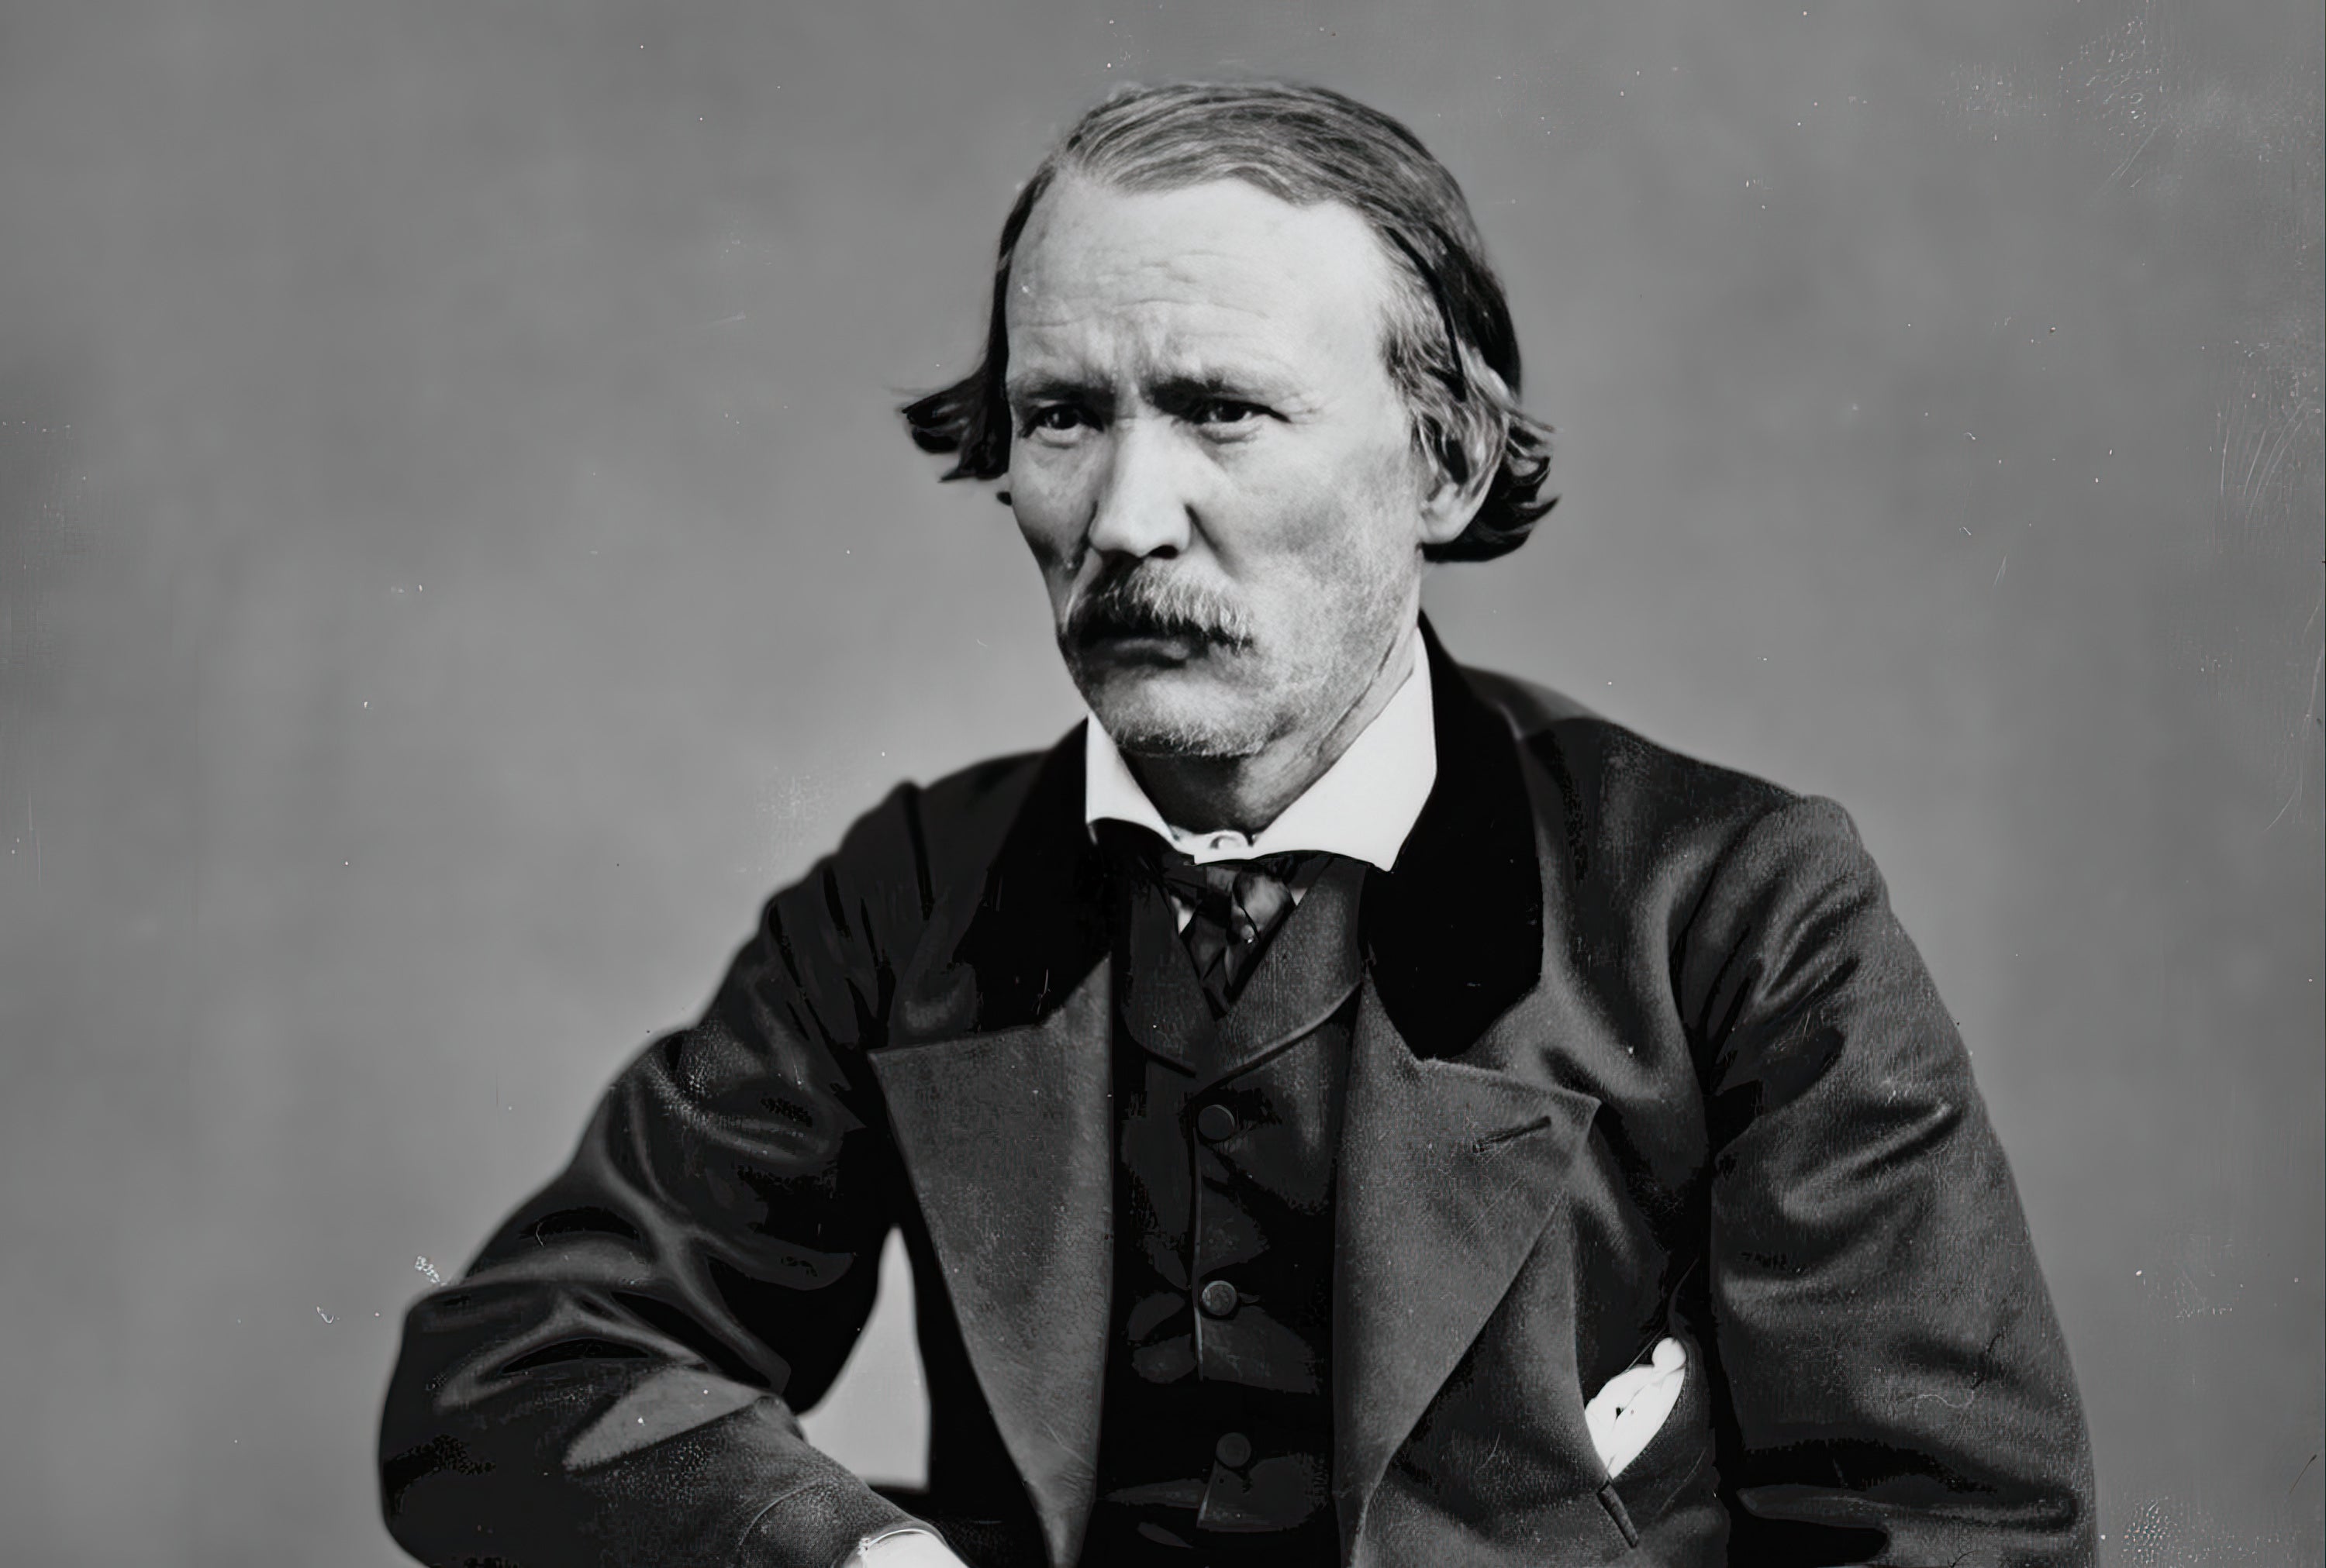 he Way to the West - Kit Carson - Last Known Photograph Portrait Image